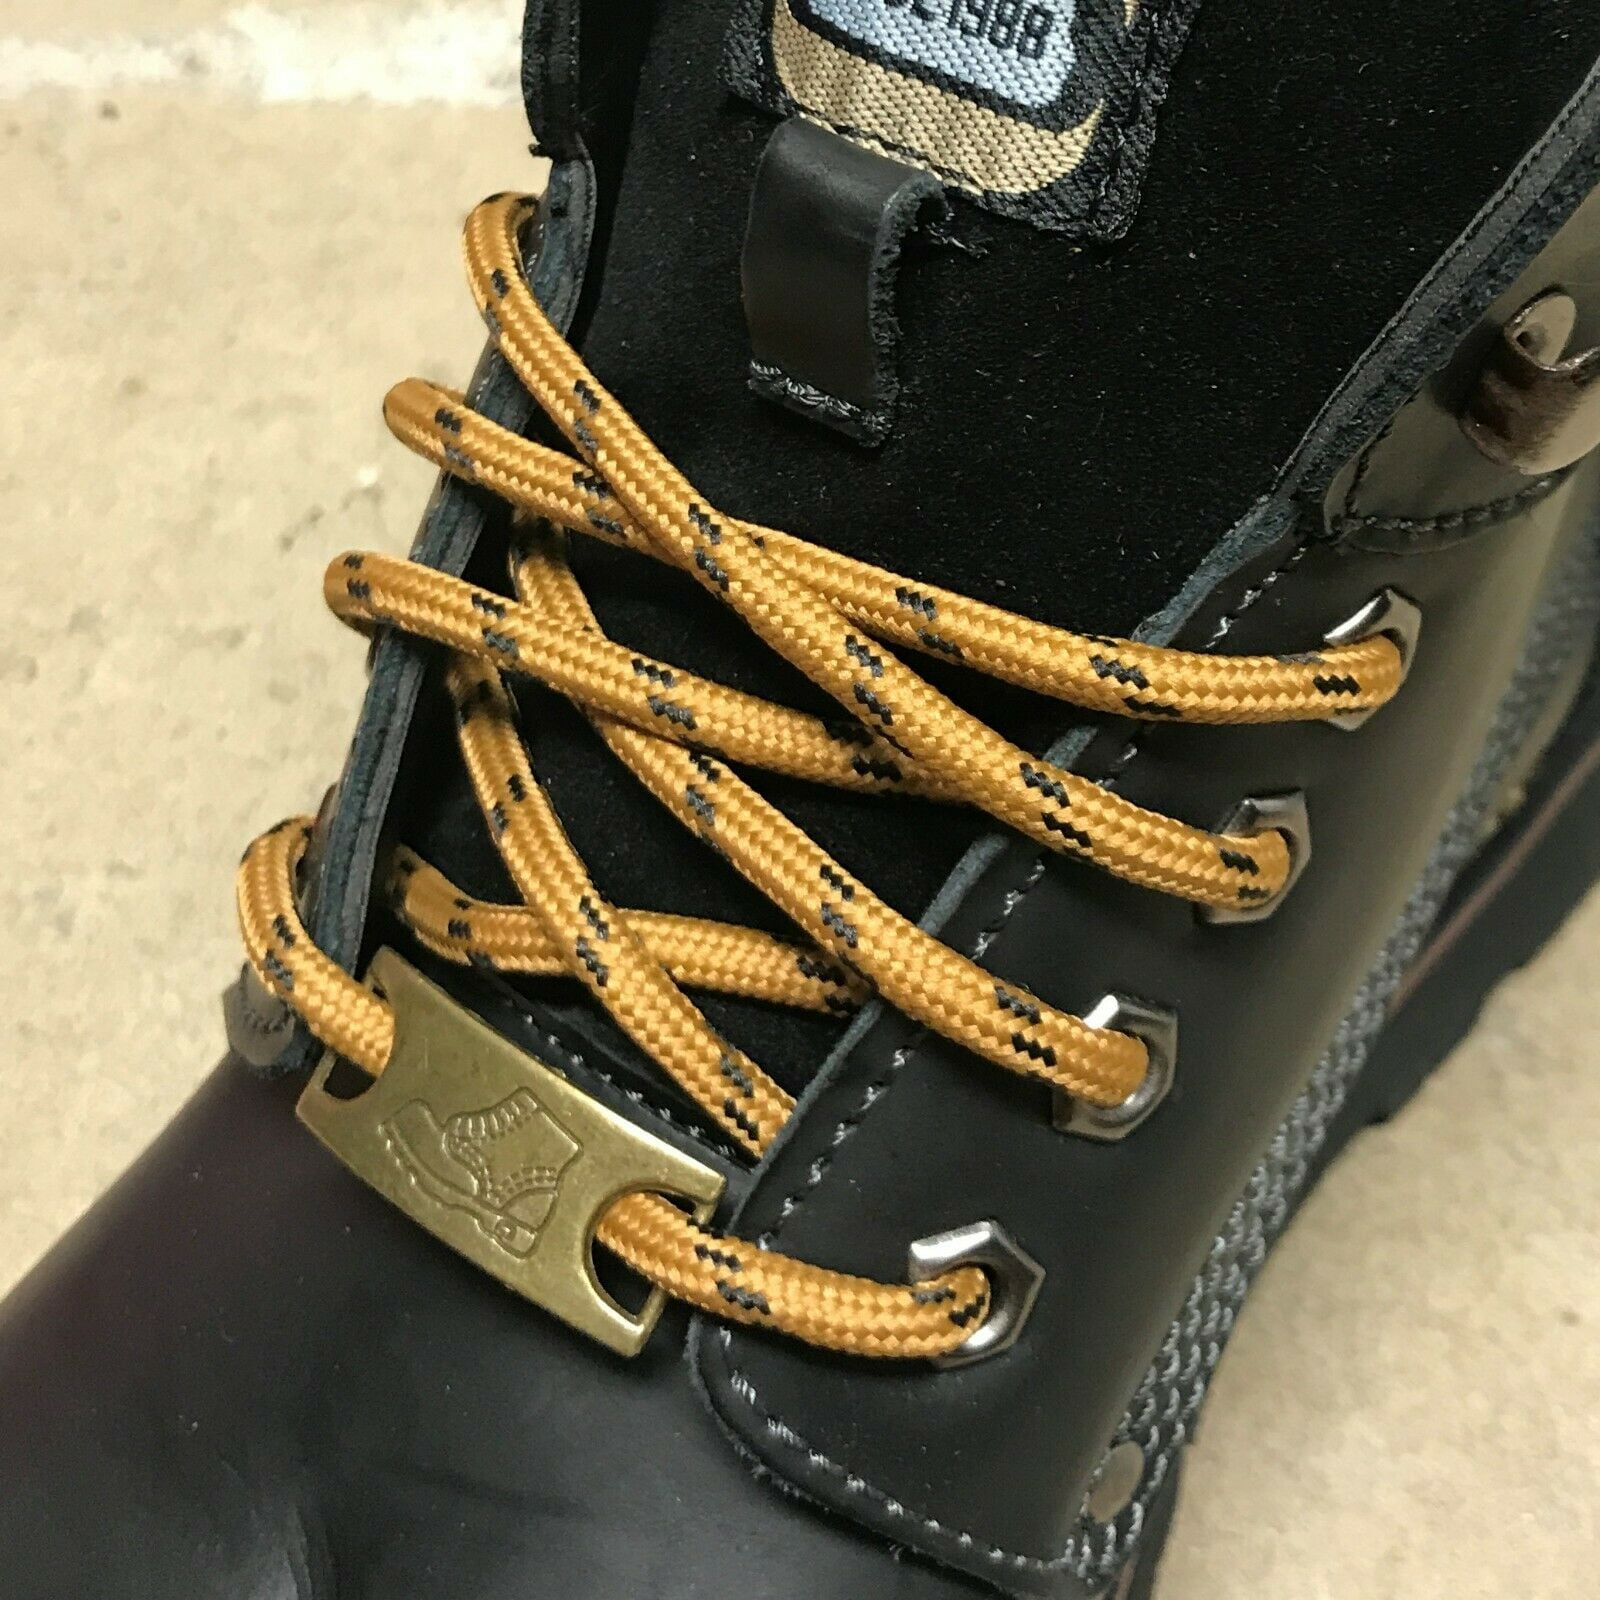 BRITISH QUALITY Hiking and Work Boot Laces Brown 5mm diameter 140cm long 